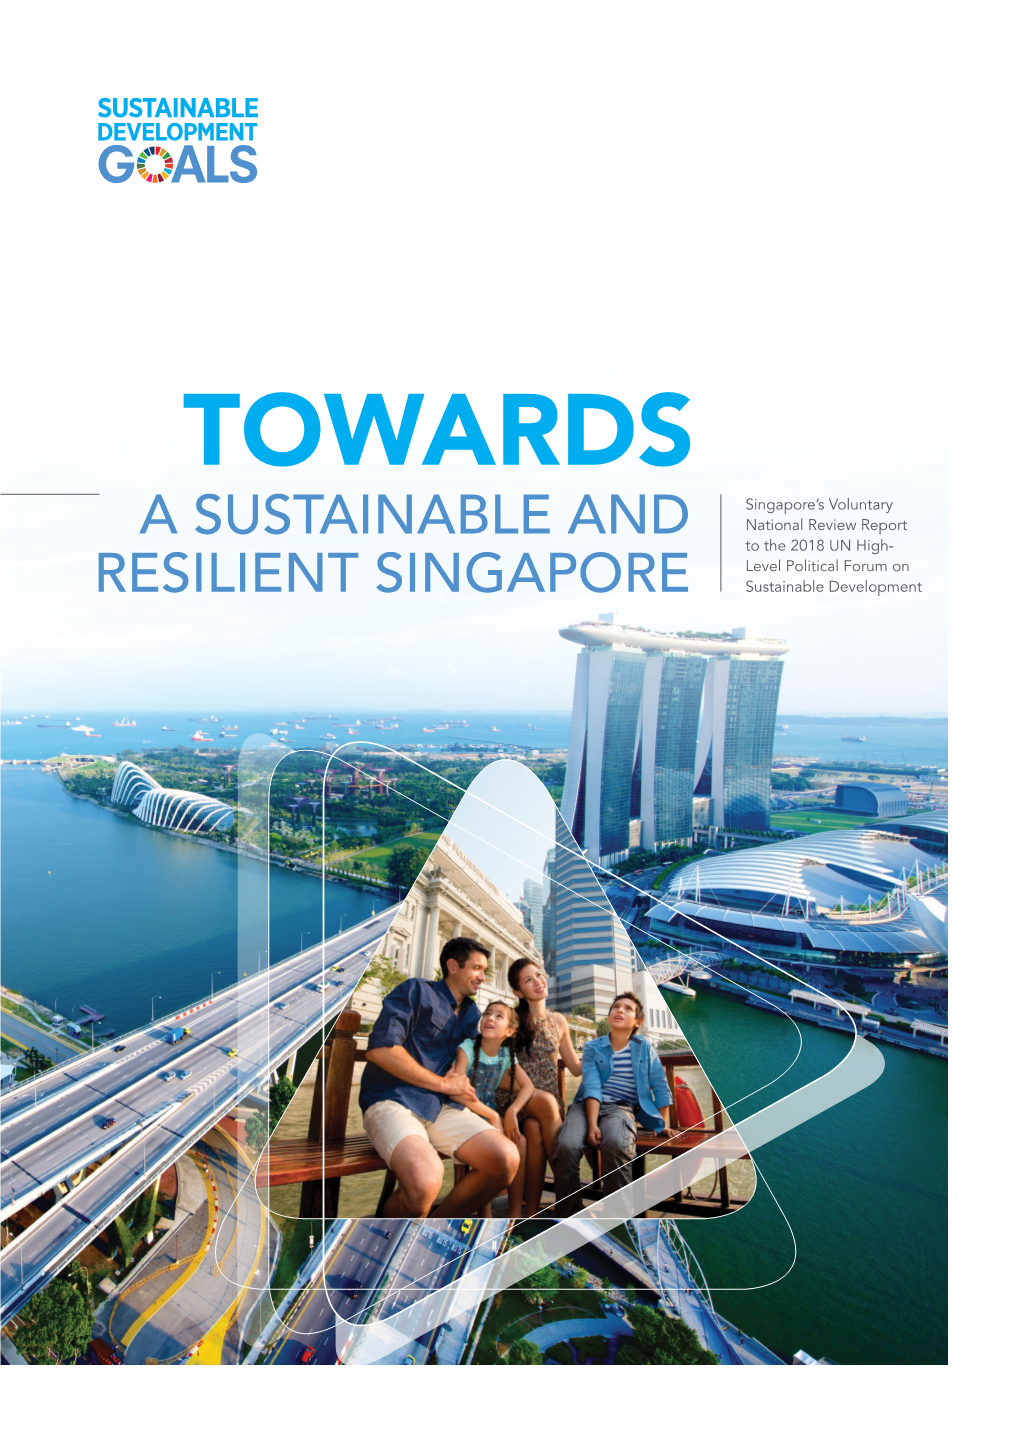 A Sustainable and Resilient Singapore